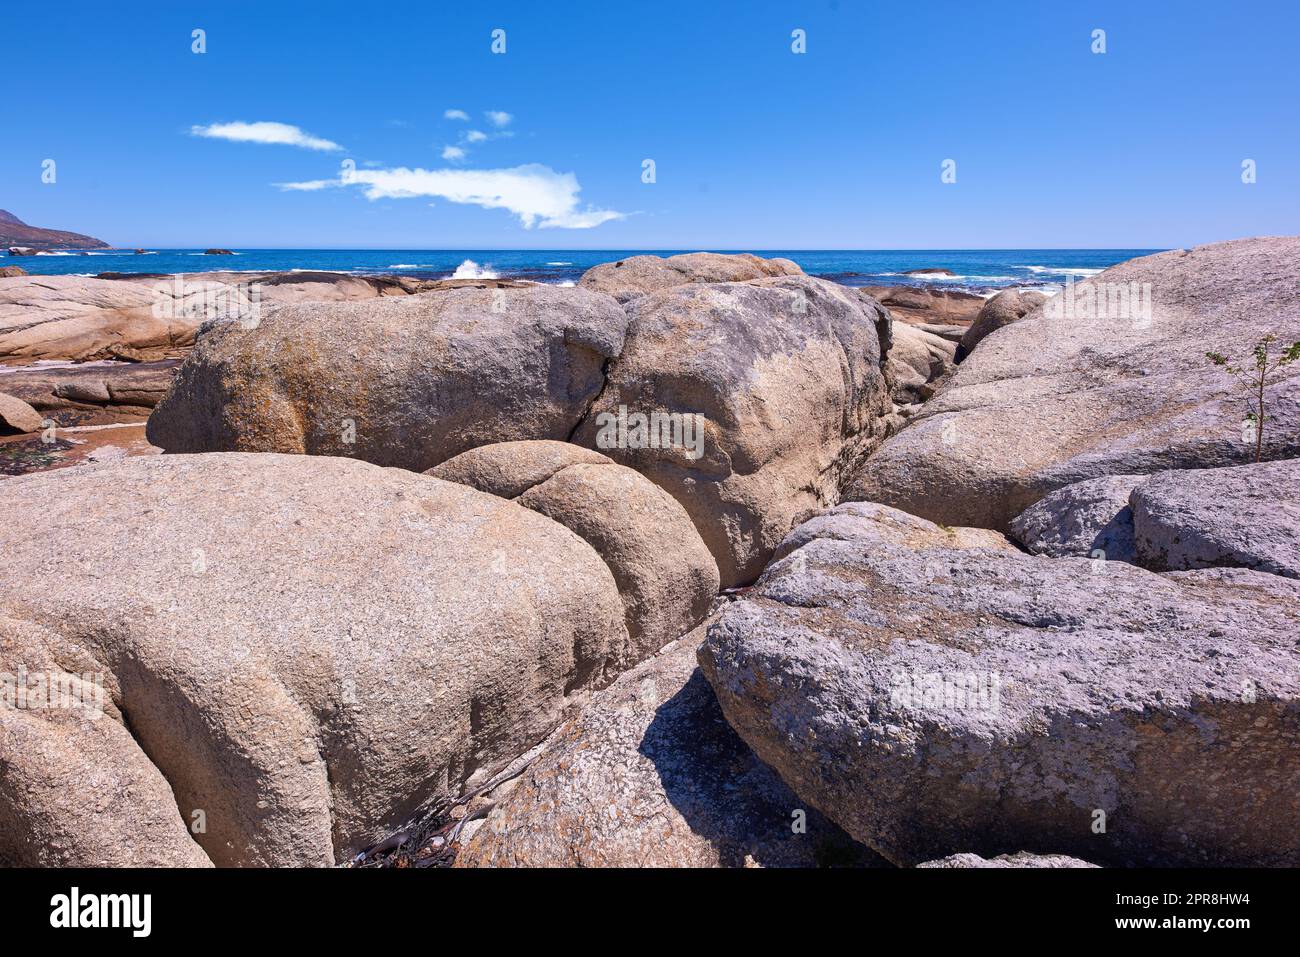 Rocky coastline with the ocean and blue sky with copyspcae in the background. Stunning nature landscape or seascape of rocks. Boulders or big natural stones in the sea with beautiful rough textures Stock Photo